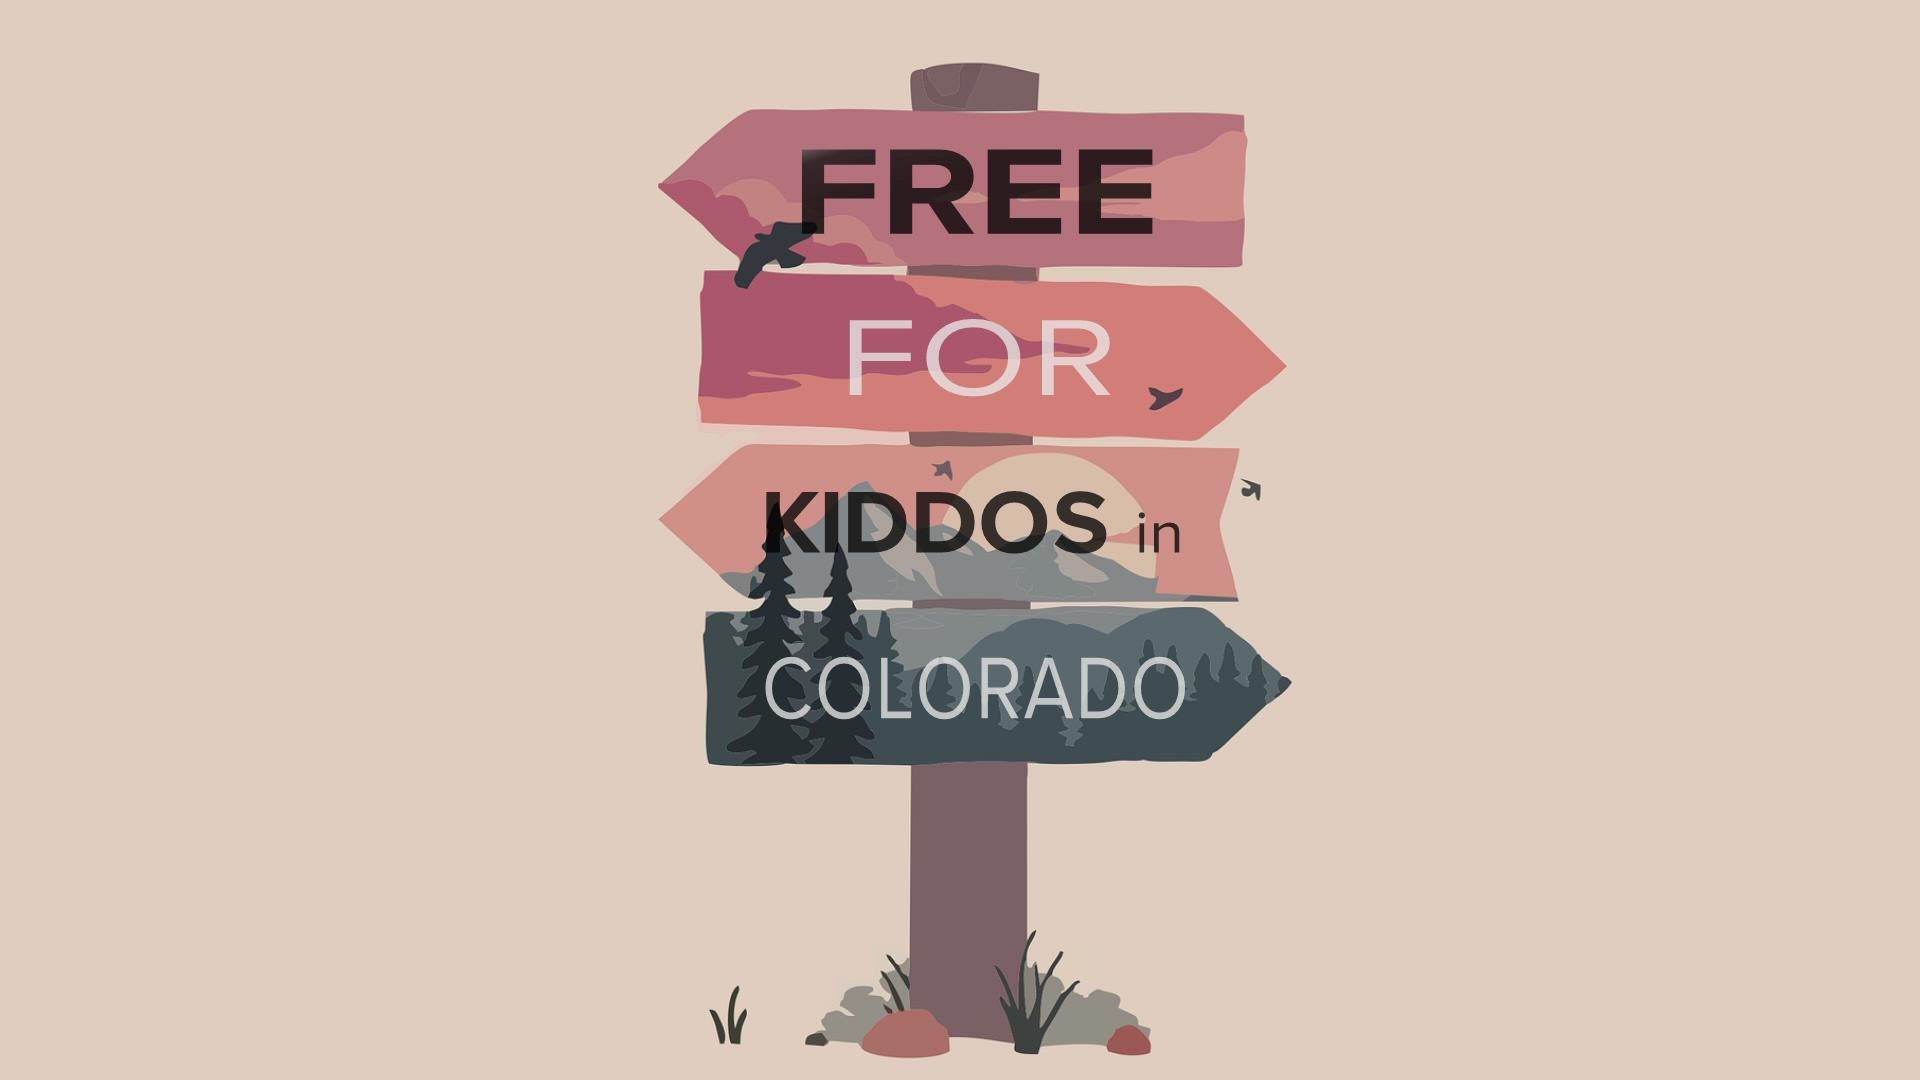 There are lots of free events for the kiddos and families this weekend in Colorado.